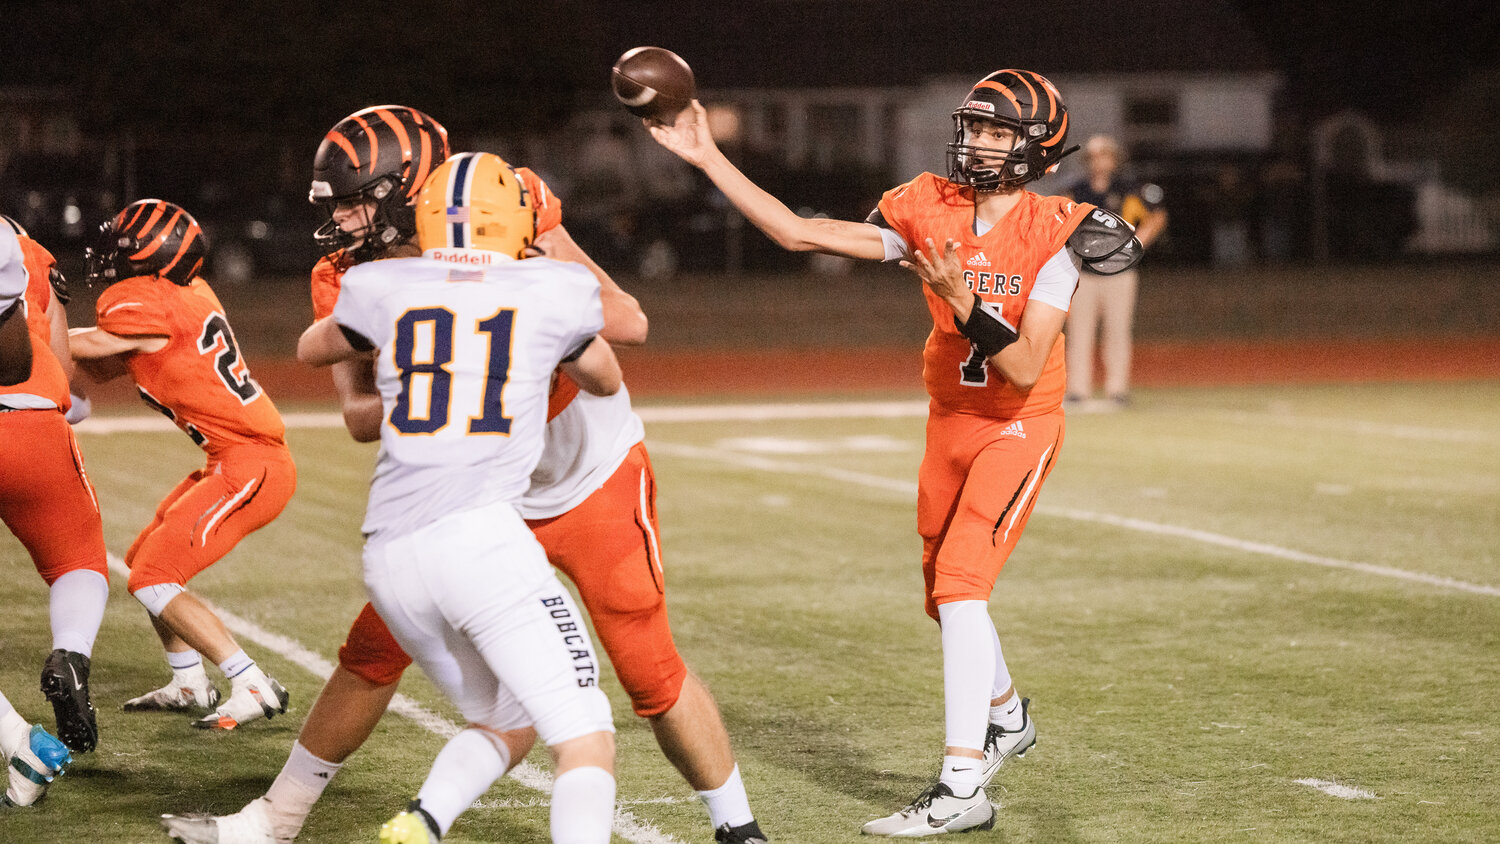 Terrell Sanders fires a pass during Centralia's loss against Aberdeen on Sept. 15.